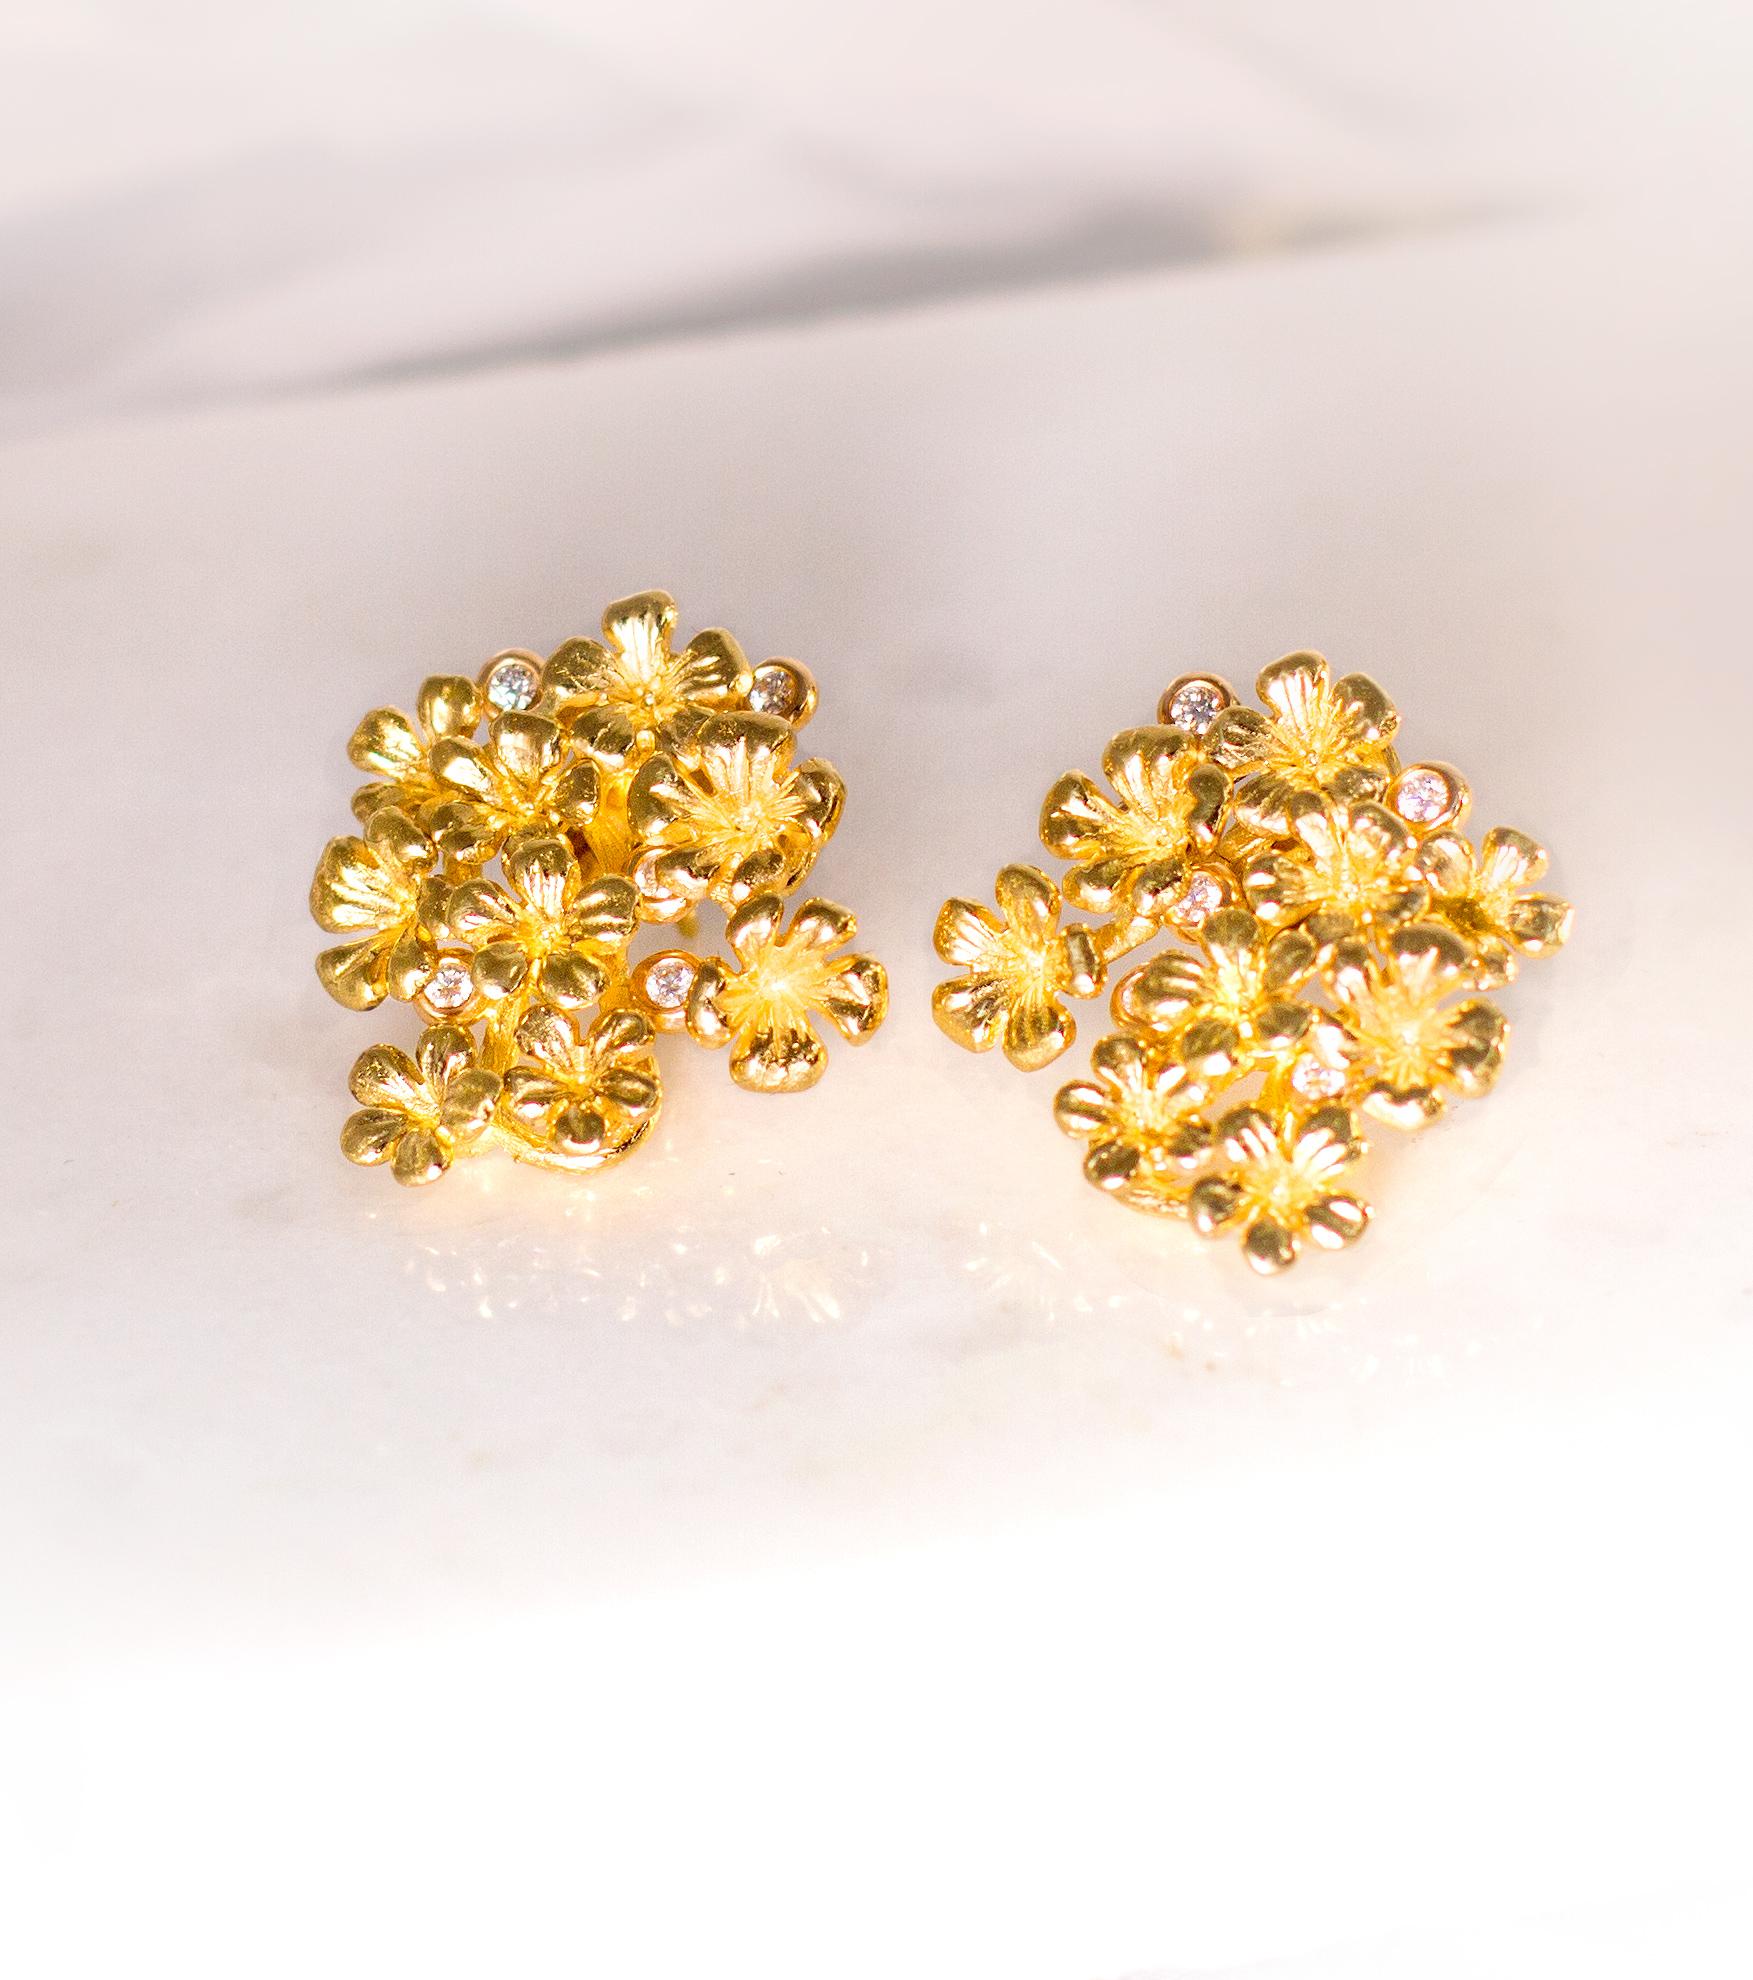 These contemporary Plum Flowers cocktail earrings are made of 18 karat yellow gold and are encrusted with 10 round diamonds. They also come with detachable neon blue paraiba tourmalines in pear cut, 5 carats in total, each measuring 11x7.5 mm. This